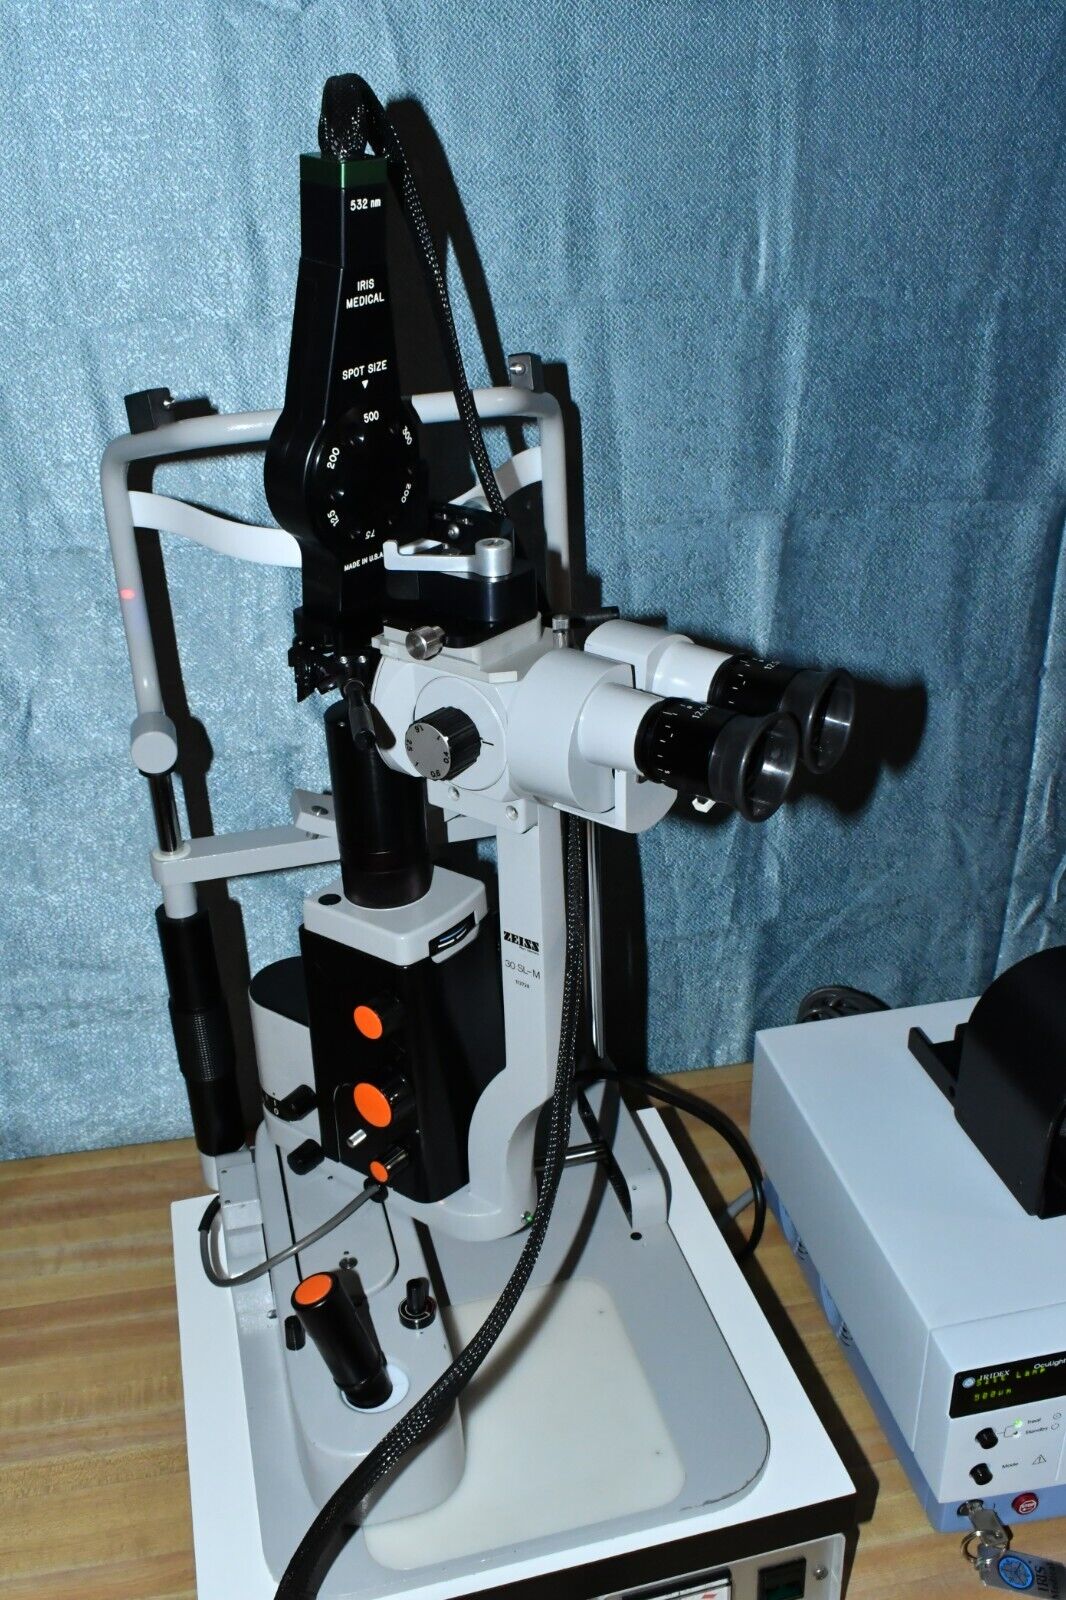 Iridex TX Green 532 laser with Zeiss slitlamp and adapter